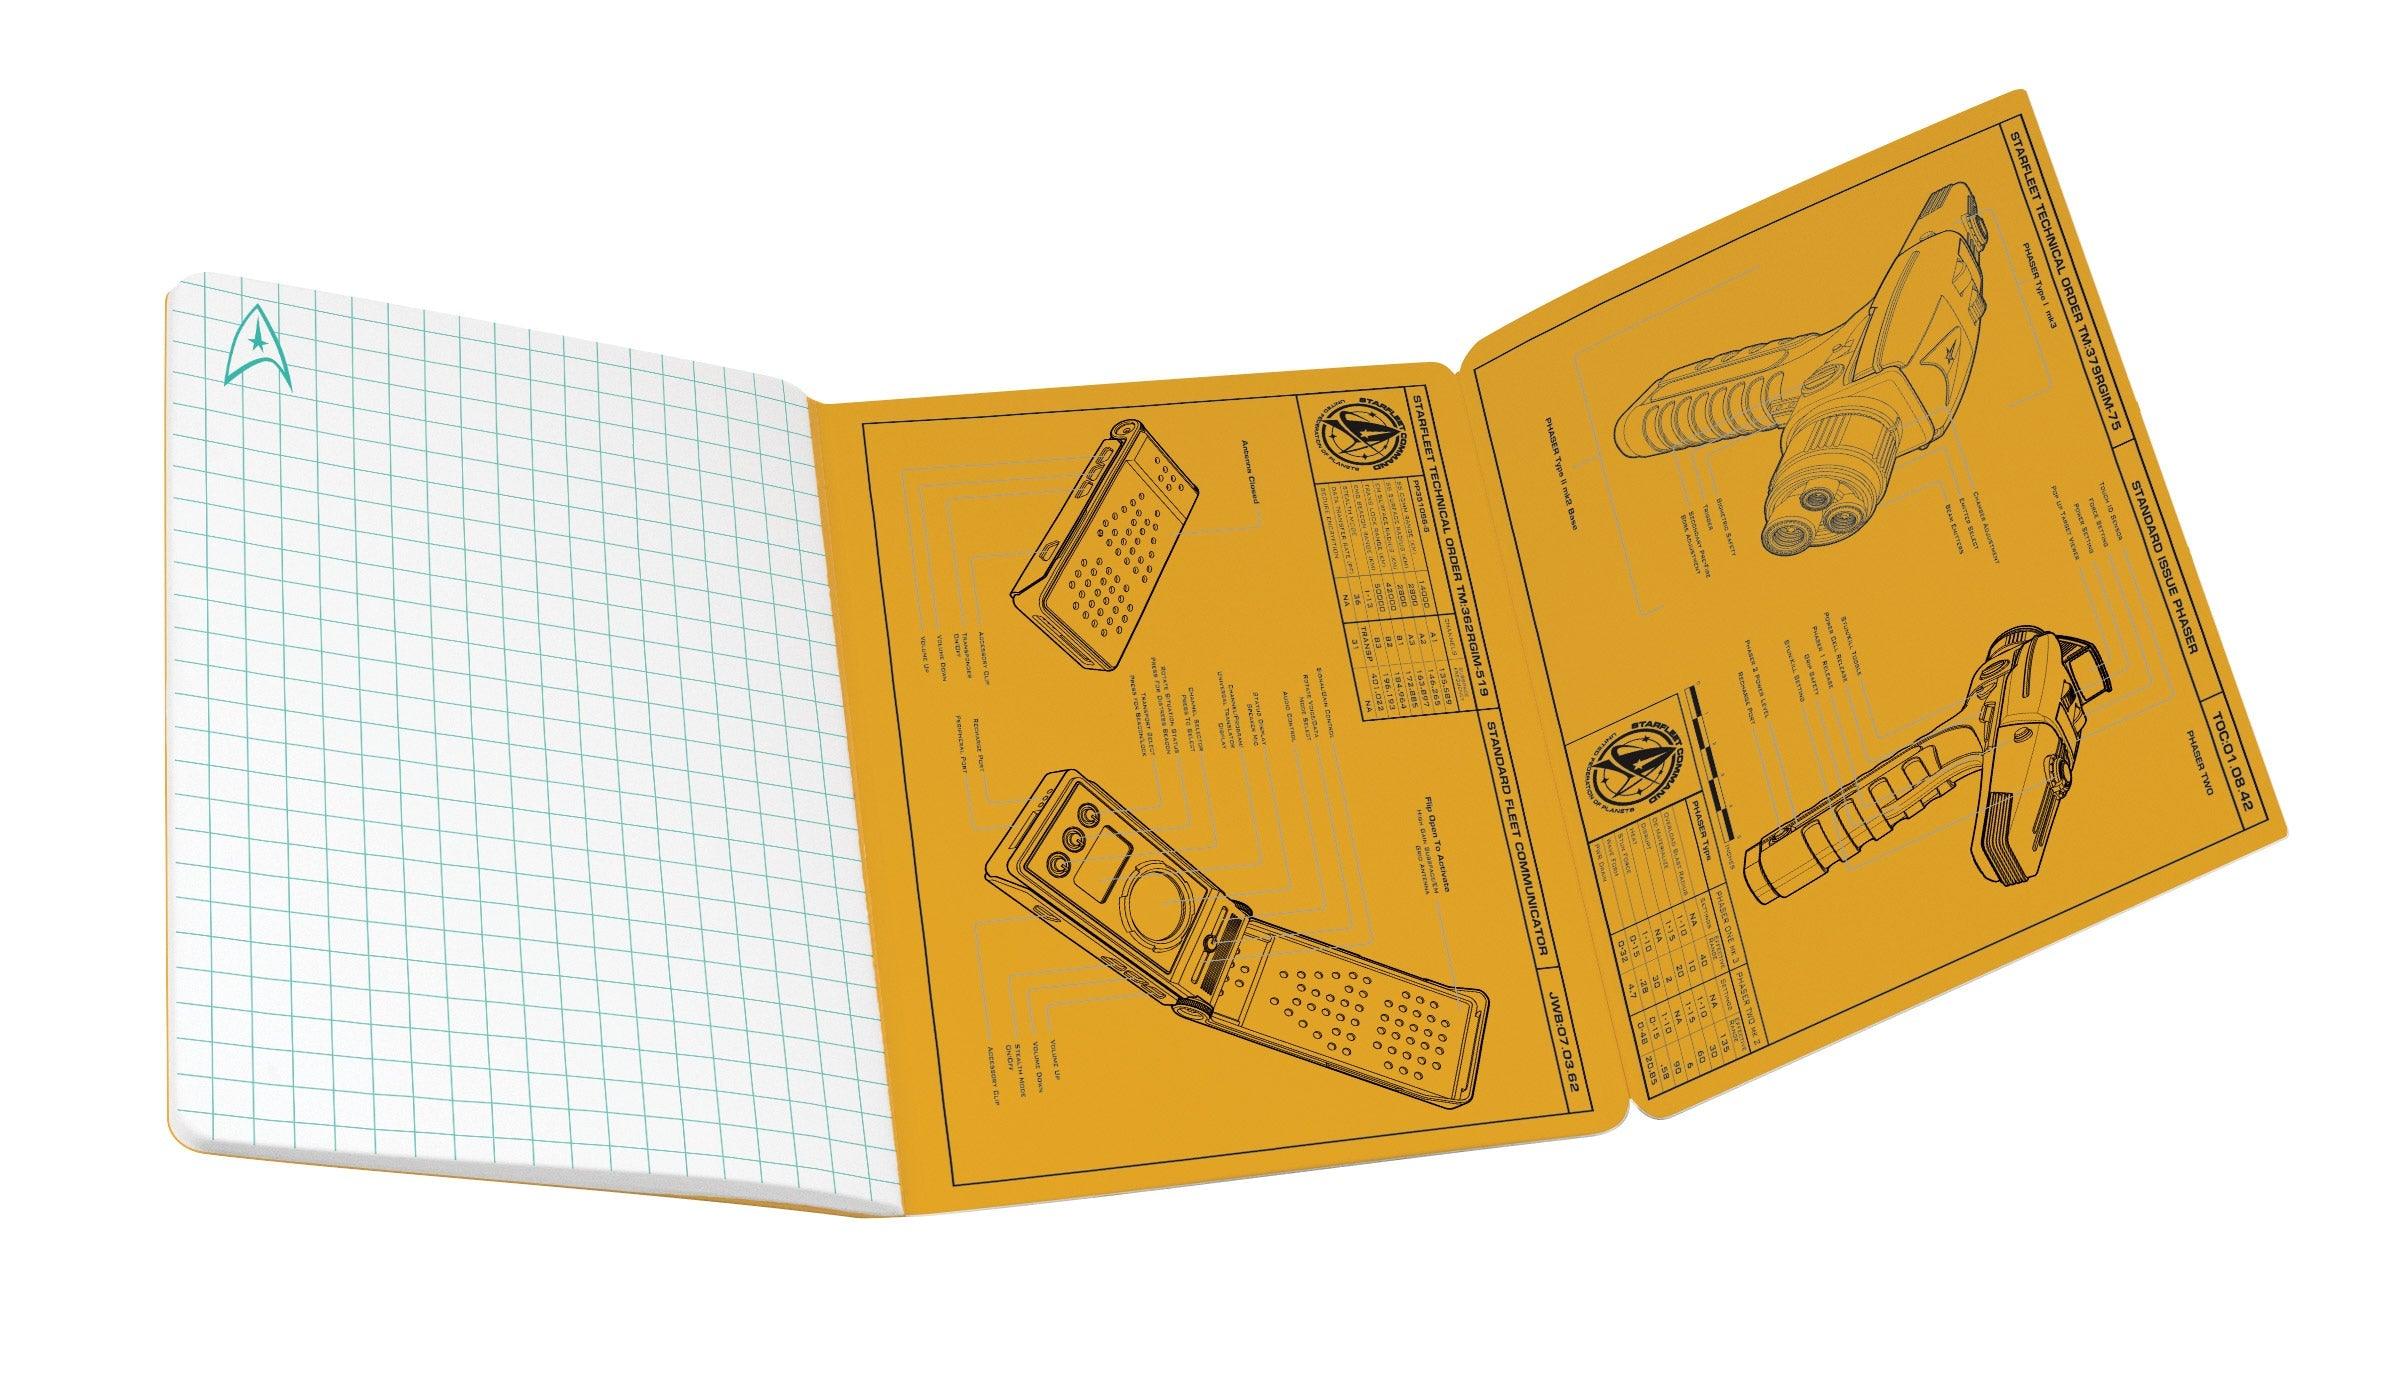 Product photo of Star Trek Engineering Notebook, a novelty gift manufactured by The Unemployed Philosophers Guild.